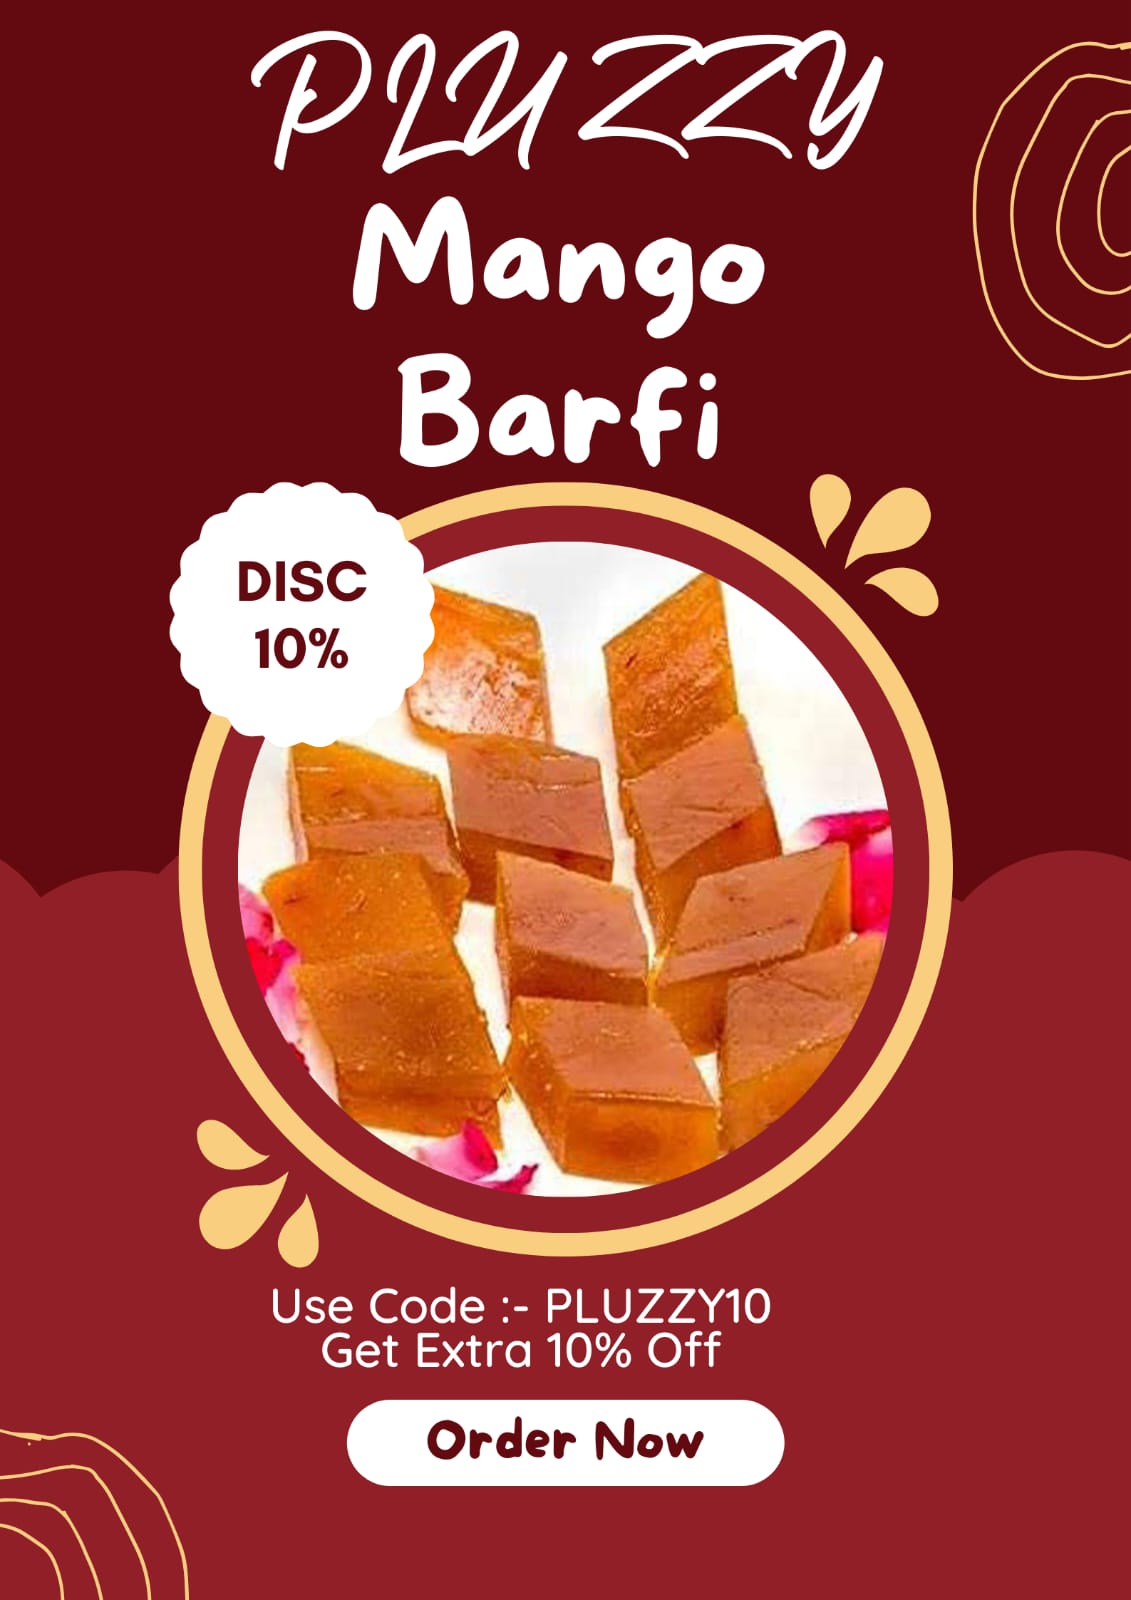 There is a huge offer going on now on Mango Papad.